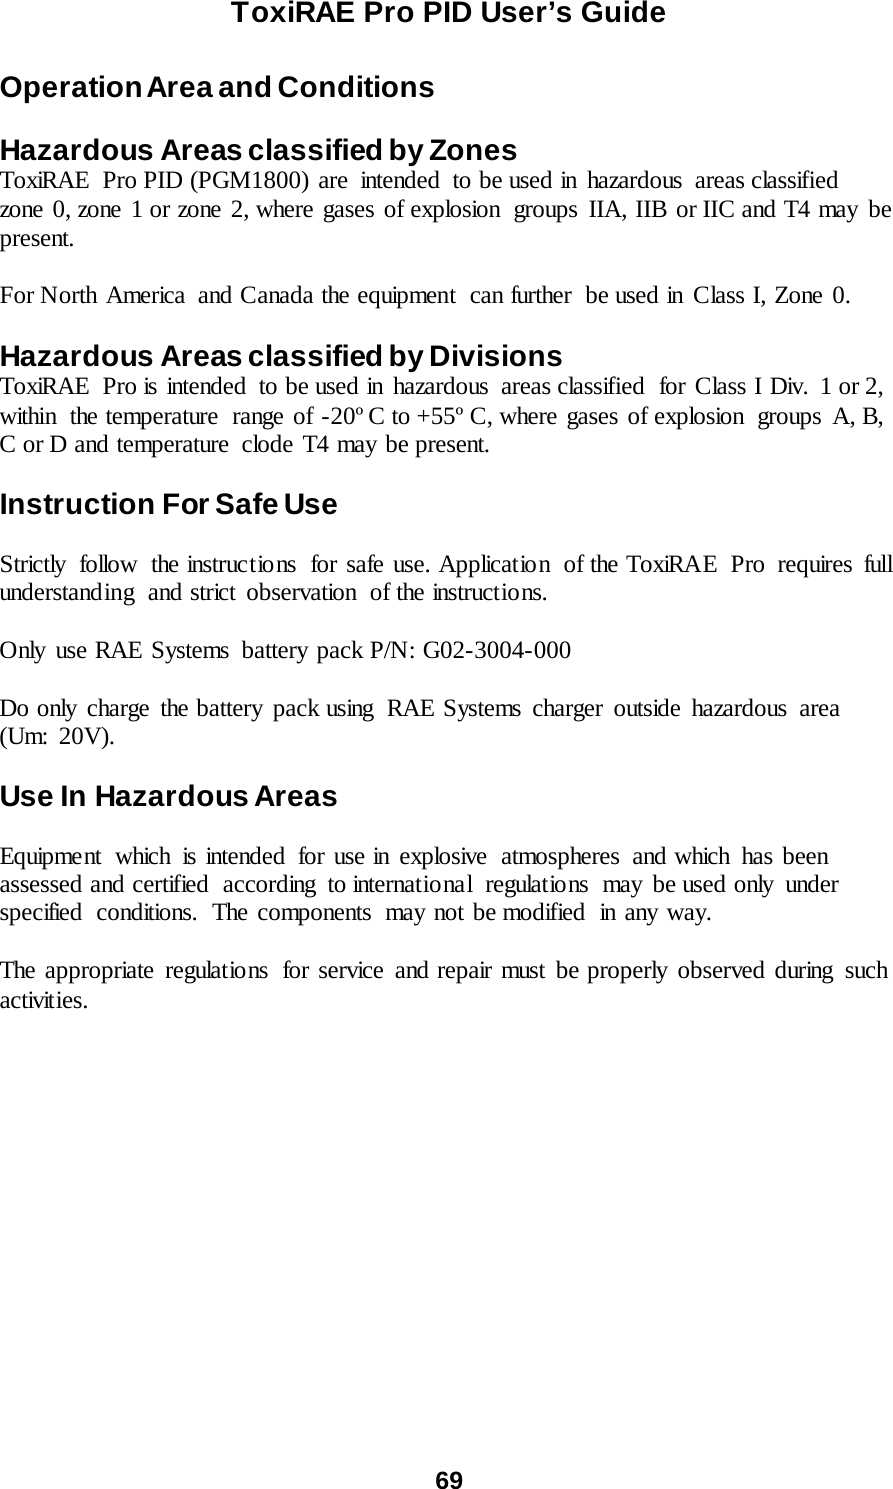 ToxiRAE Pro PID User’s Guide  69   Operation Area and Conditions  Hazardous Areas classified by Zones ToxiRAE Pro PID (PGM1800) are  intended  to be used in hazardous  areas classified  zone 0, zone 1 or zone 2, where gases of explosion  groups IIA, IIB or IIC and T4 may be present.   For North America  and Canada the equipment  can further  be used in Class I, Zone 0.  Hazardous Areas classified by Divisions ToxiRAE Pro is intended  to be used in  hazardous  areas classified  for Class I Div.  1 or 2, within the temperature range of -20º C to +55º C, where gases of explosion  groups A, B, C or D and temperature  clode T4 may be present.   Instruction For Safe Use  Strictly follow the instructio ns for safe use. Applicatio n  of the ToxiRAE Pro  requires full understanding  and strict observation  of the instructions.    Only use RAE Systems battery pack P/N: G02-3004-000  Do only charge the battery pack using RAE Systems charger outside hazardous area (Um: 20V).  Use In Hazardous Areas  Equipment which is intended for use in explosive atmospheres and which has been assessed and certified according to international regulations may be used only under specified  conditions.  The components  may not be modified  in any way.   The appropriate regulations for service and repair must be properly observed during such activities.   